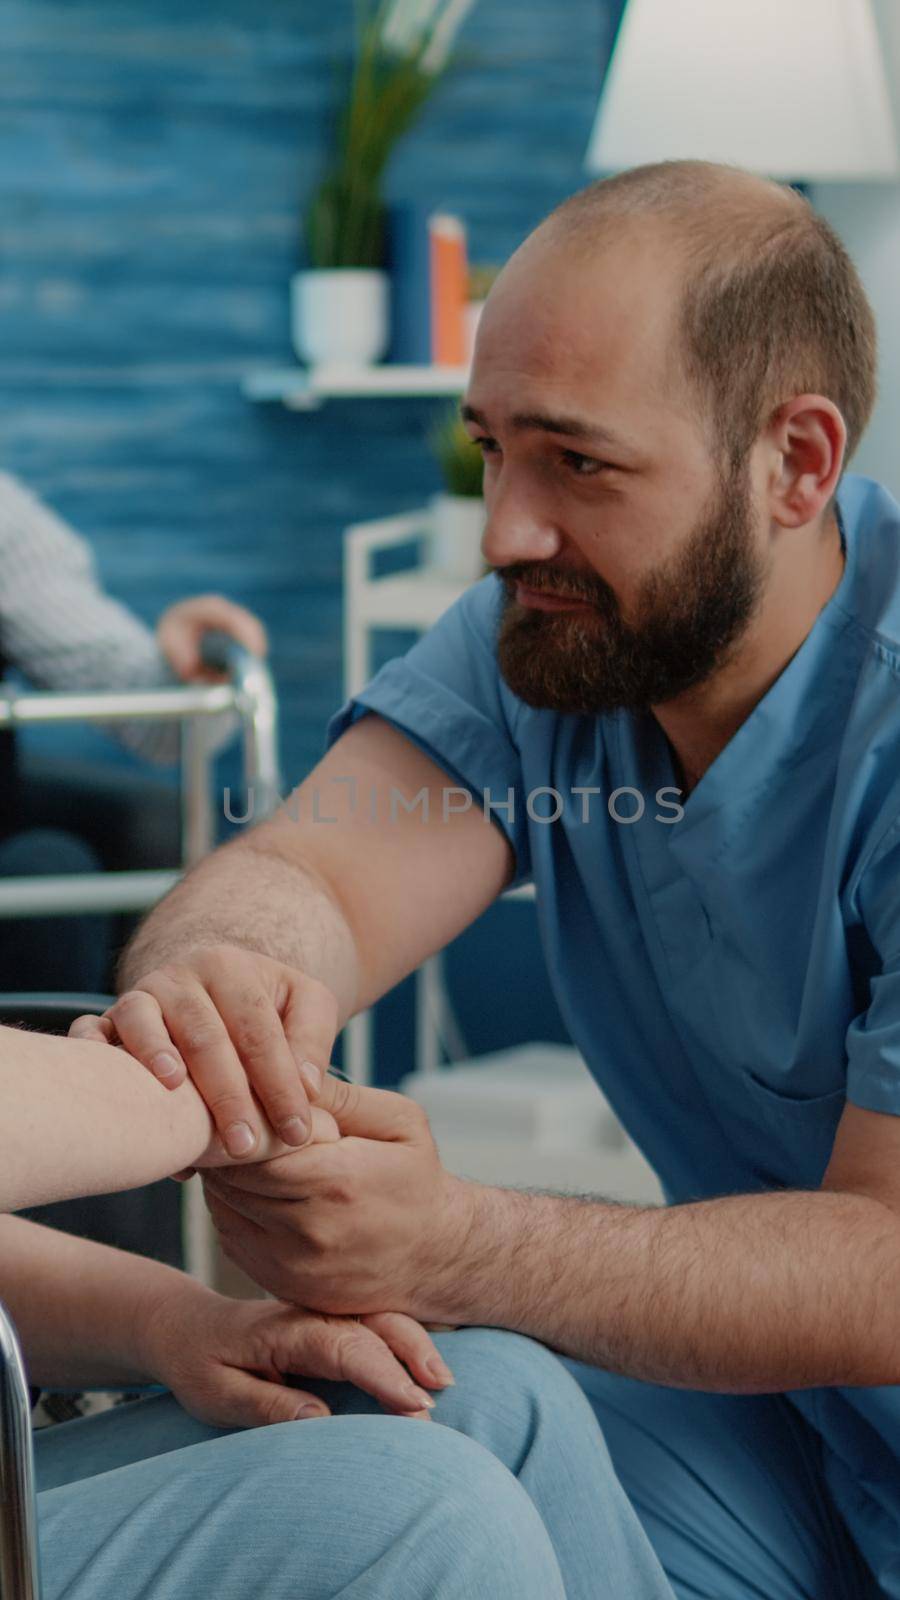 Man nurse comforting senior woman with chronic issues by DCStudio